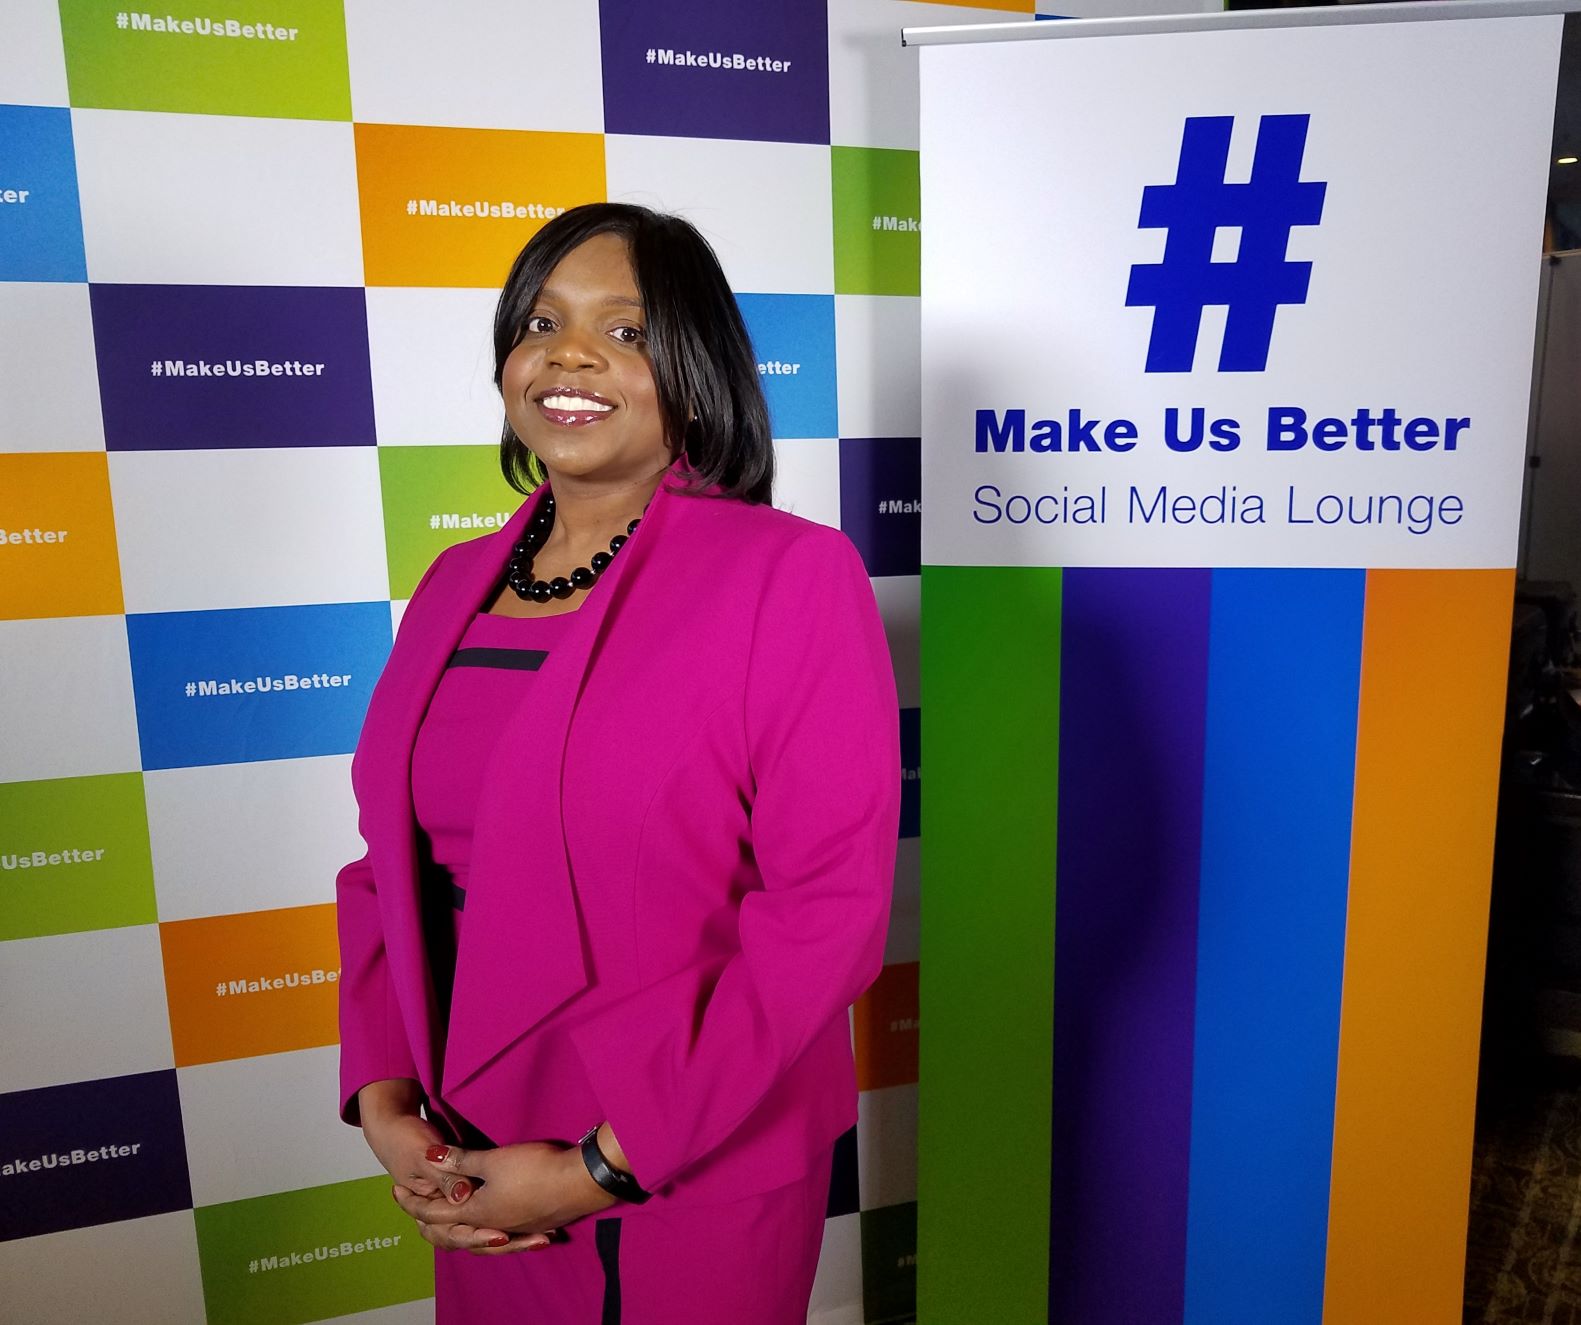 Kimberly poses in front of colorful backdrop and signage, including sign that reads, “# Make Us Better”.